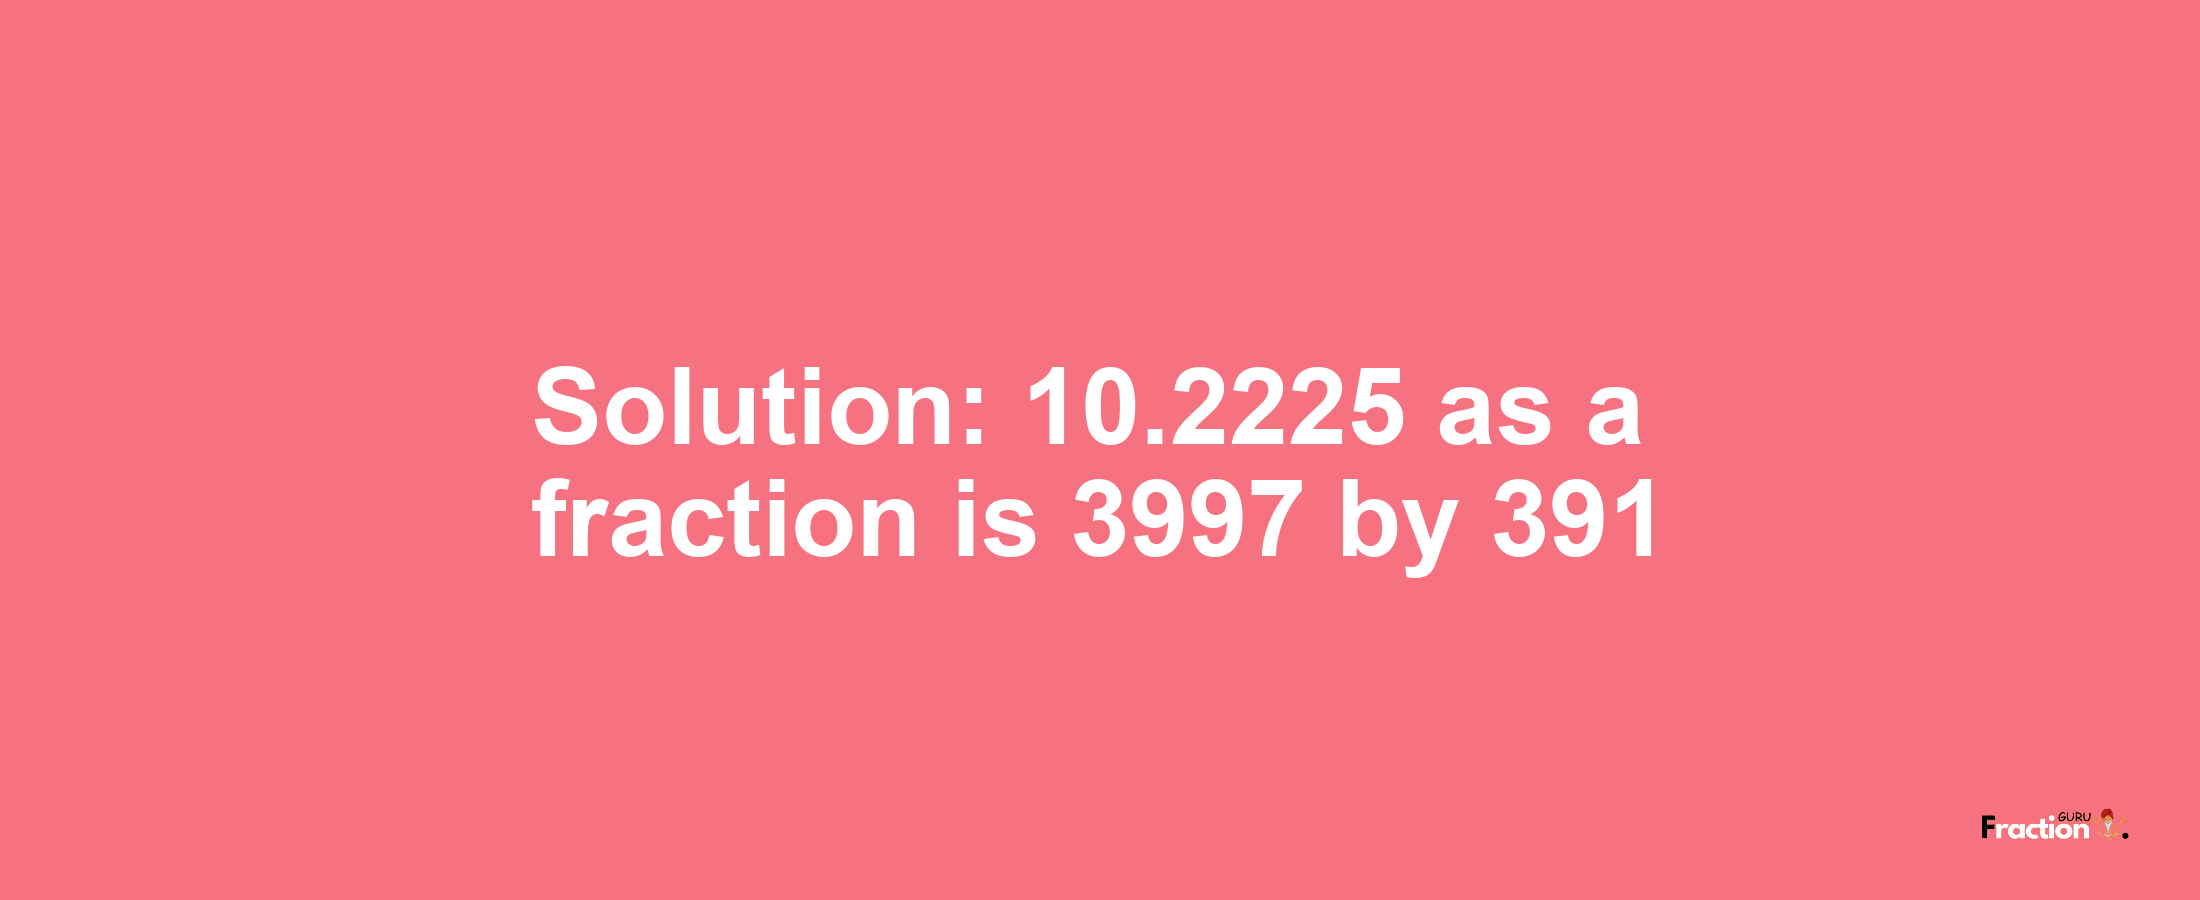 Solution:10.2225 as a fraction is 3997/391